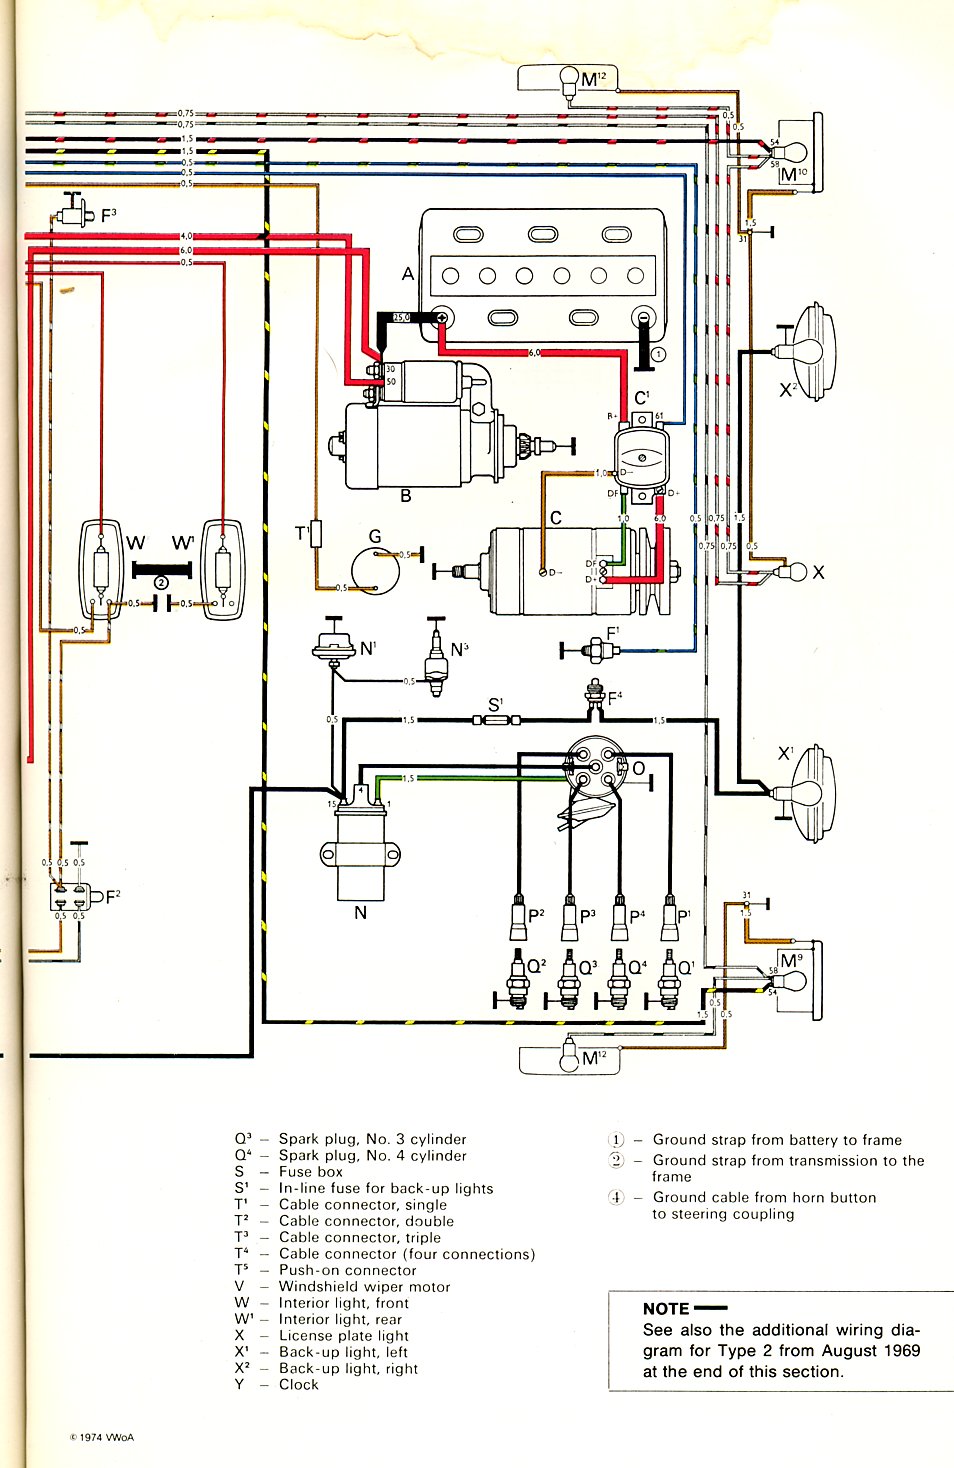 Pin By Cory Grandinetti On Vw Links Electrical Wiring Electrical Projects Electrical Wiring Diagram